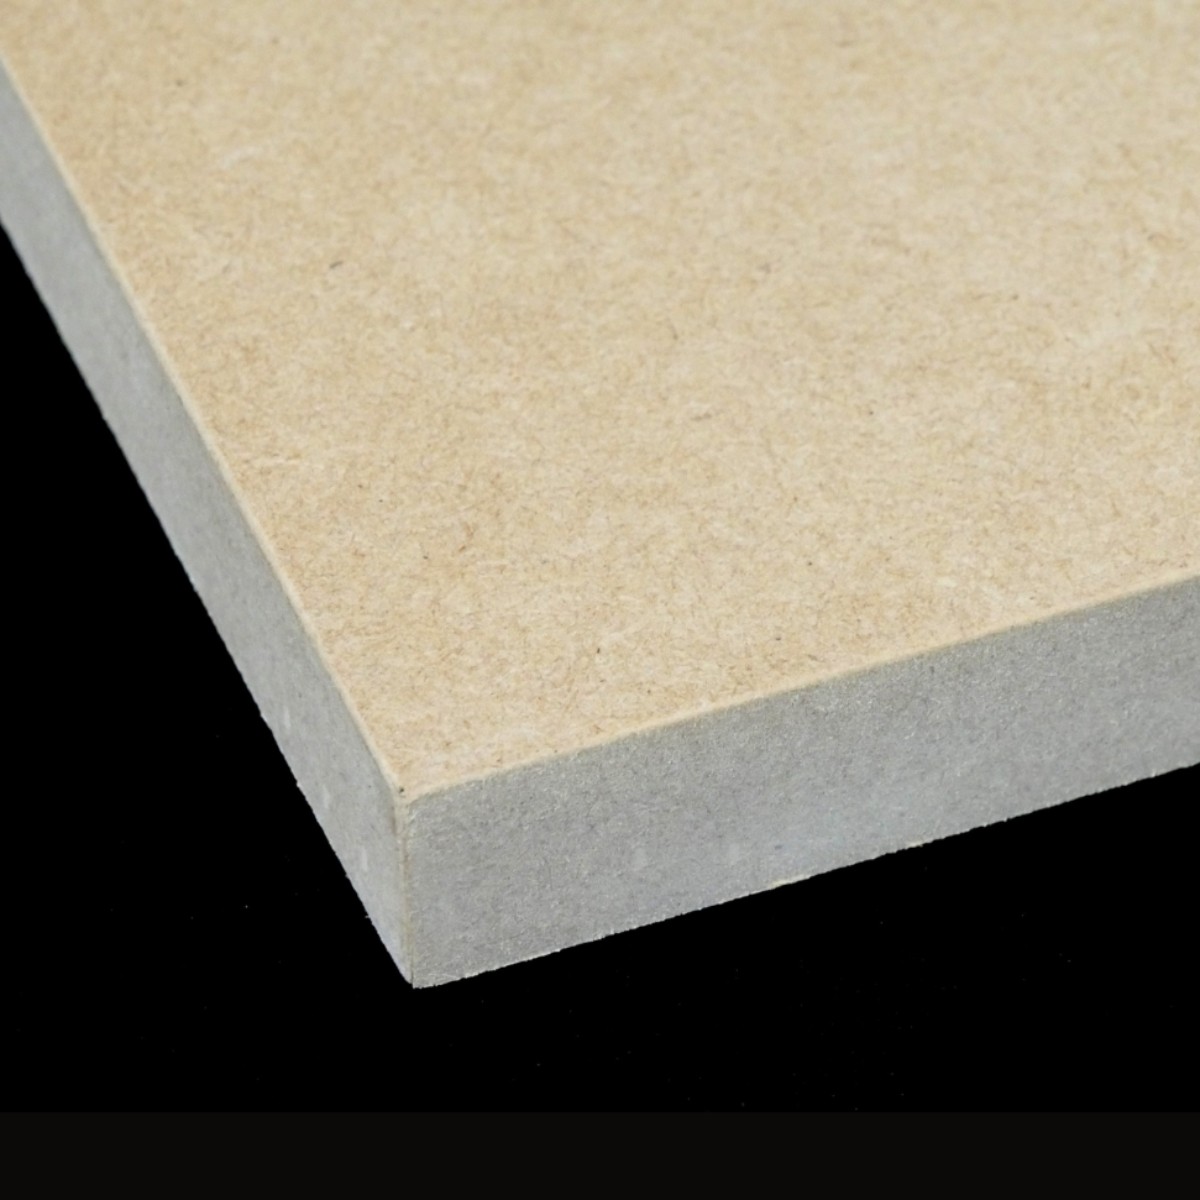 16″x22″ 406x559mm – Sanded